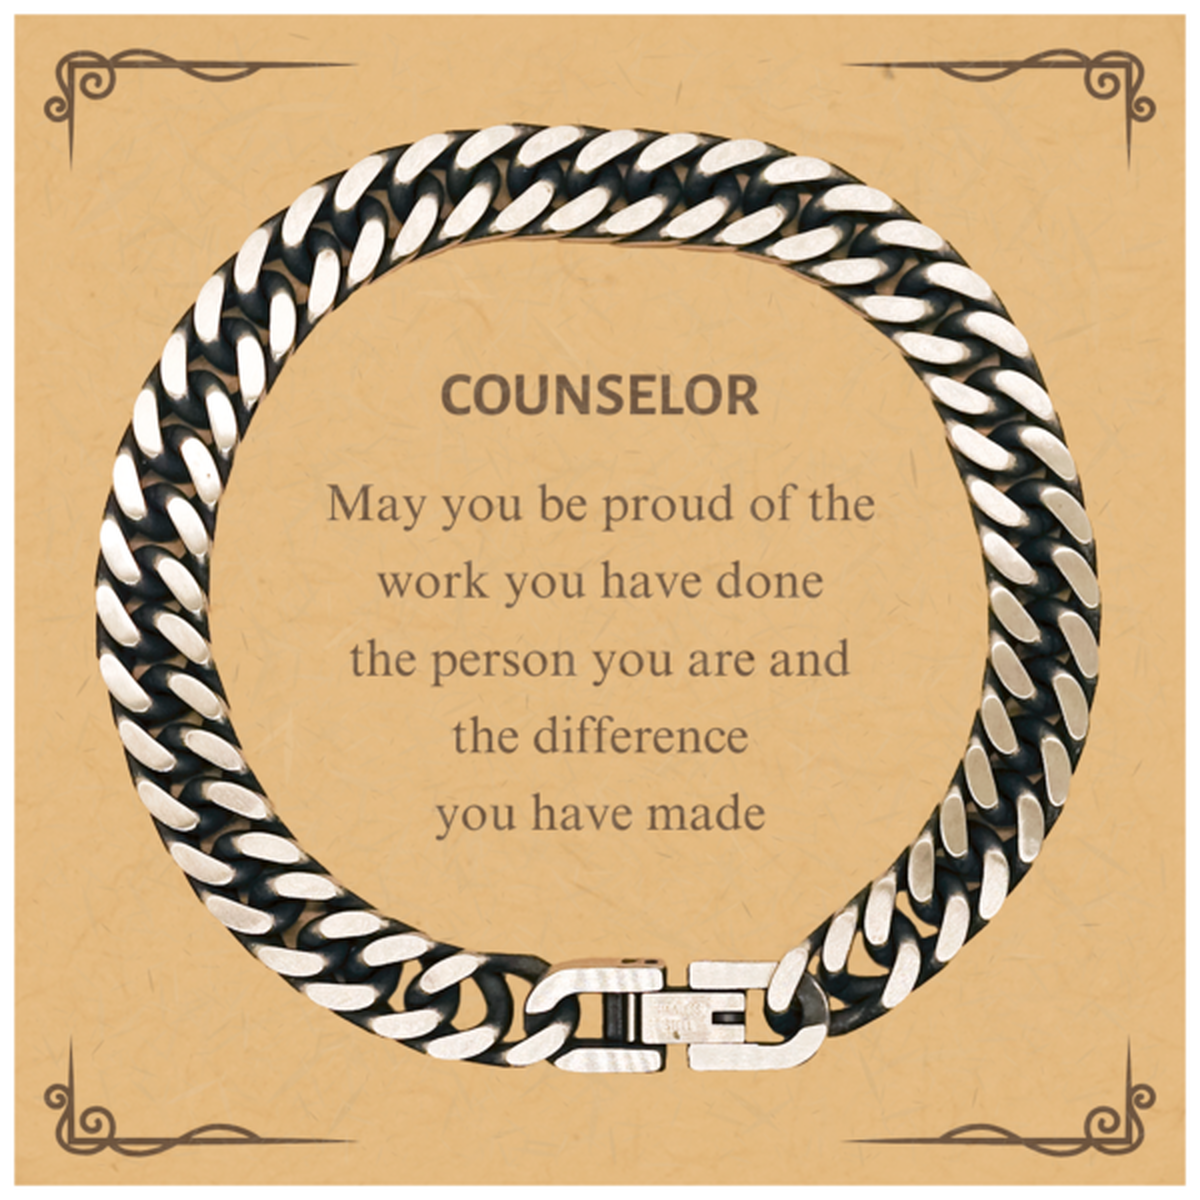 Counselor May you be proud of the work you have done, Retirement Counselor Cuban Link Chain Bracelet for Colleague Appreciation Gifts Amazing for Counselor